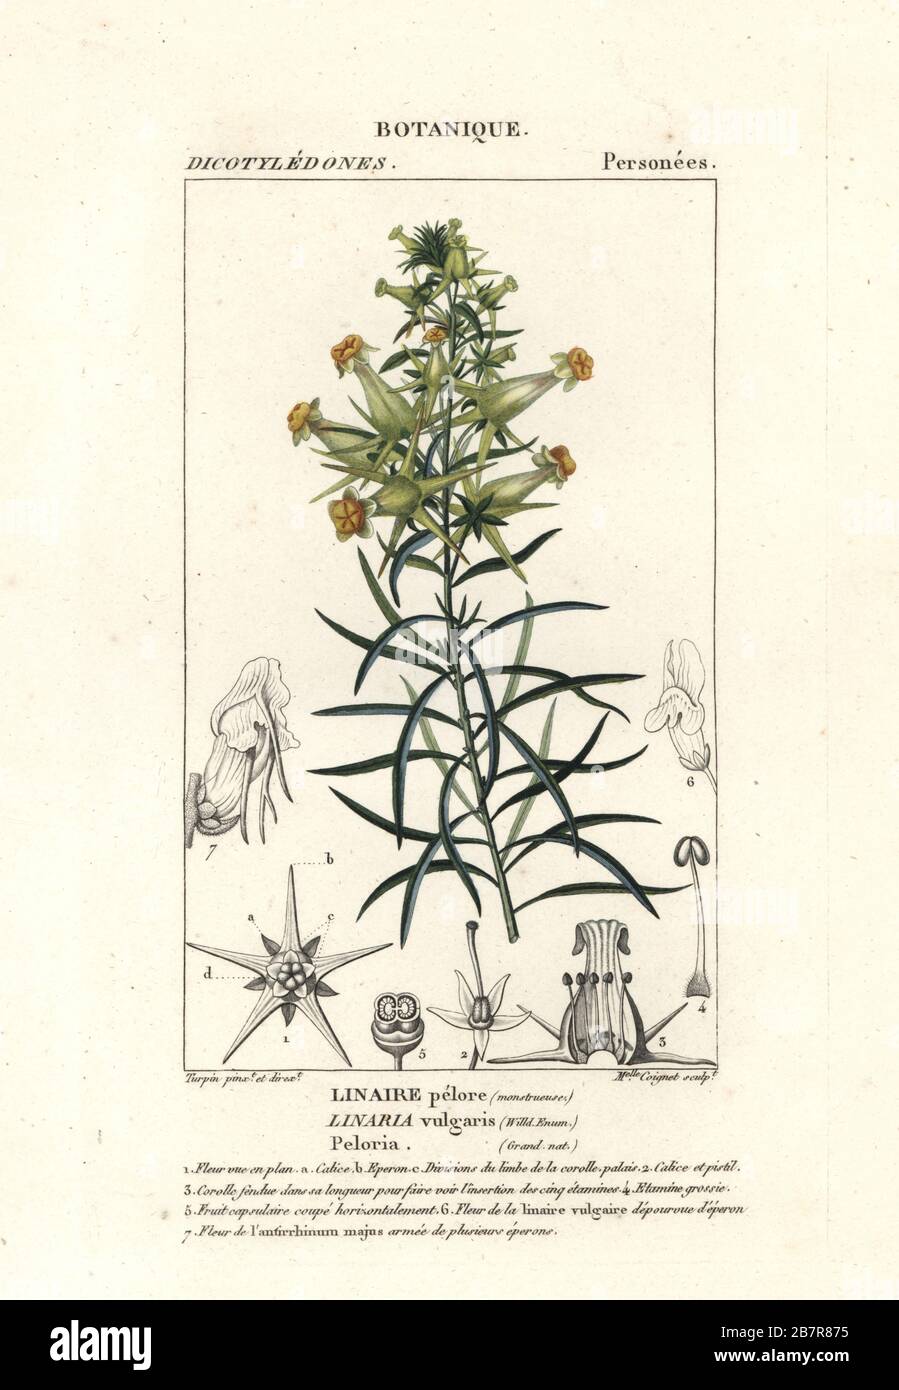 Common toadflax, Linaris vulgaris. Linaire pelore. Handcoloured copperplate stipple engraving from Antoine Laurent de Jussieu's Dizionario delle Scienze Naturali, Dictionary of Natural Science, Florence, Italy, 1837. Illustration engraved by Mlle. Coignet, drawn and directed by Pierre Jean-Francois Turpin, and published by Batelli e Figli. Turpin (1775-1840) is considered one of the greatest French botanical illustrators of the 19th century. Stock Photo